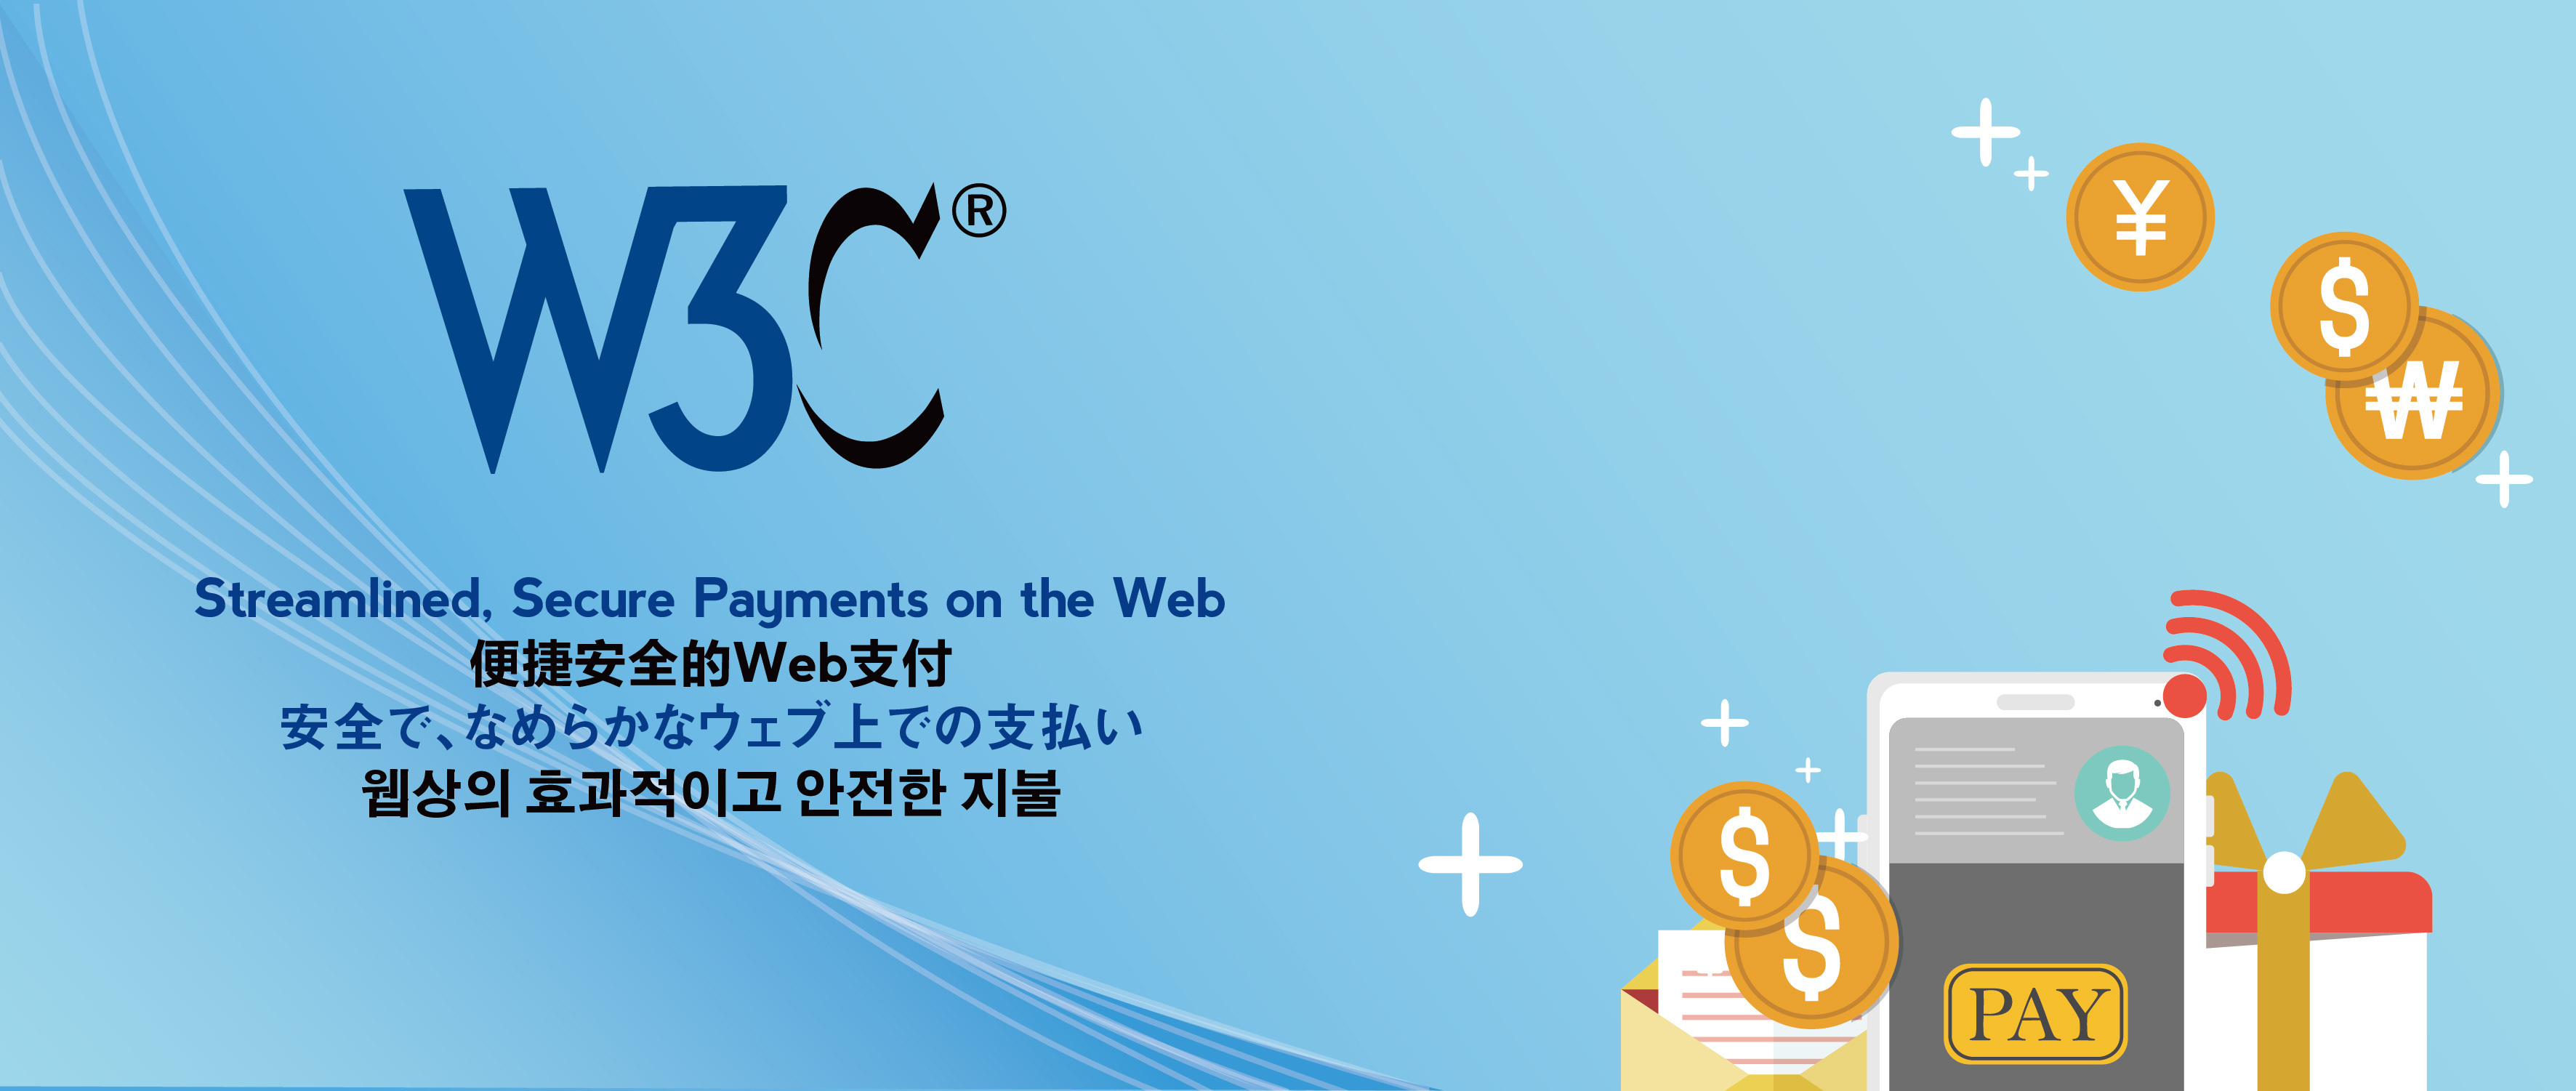 W3C Seamless Payments booth